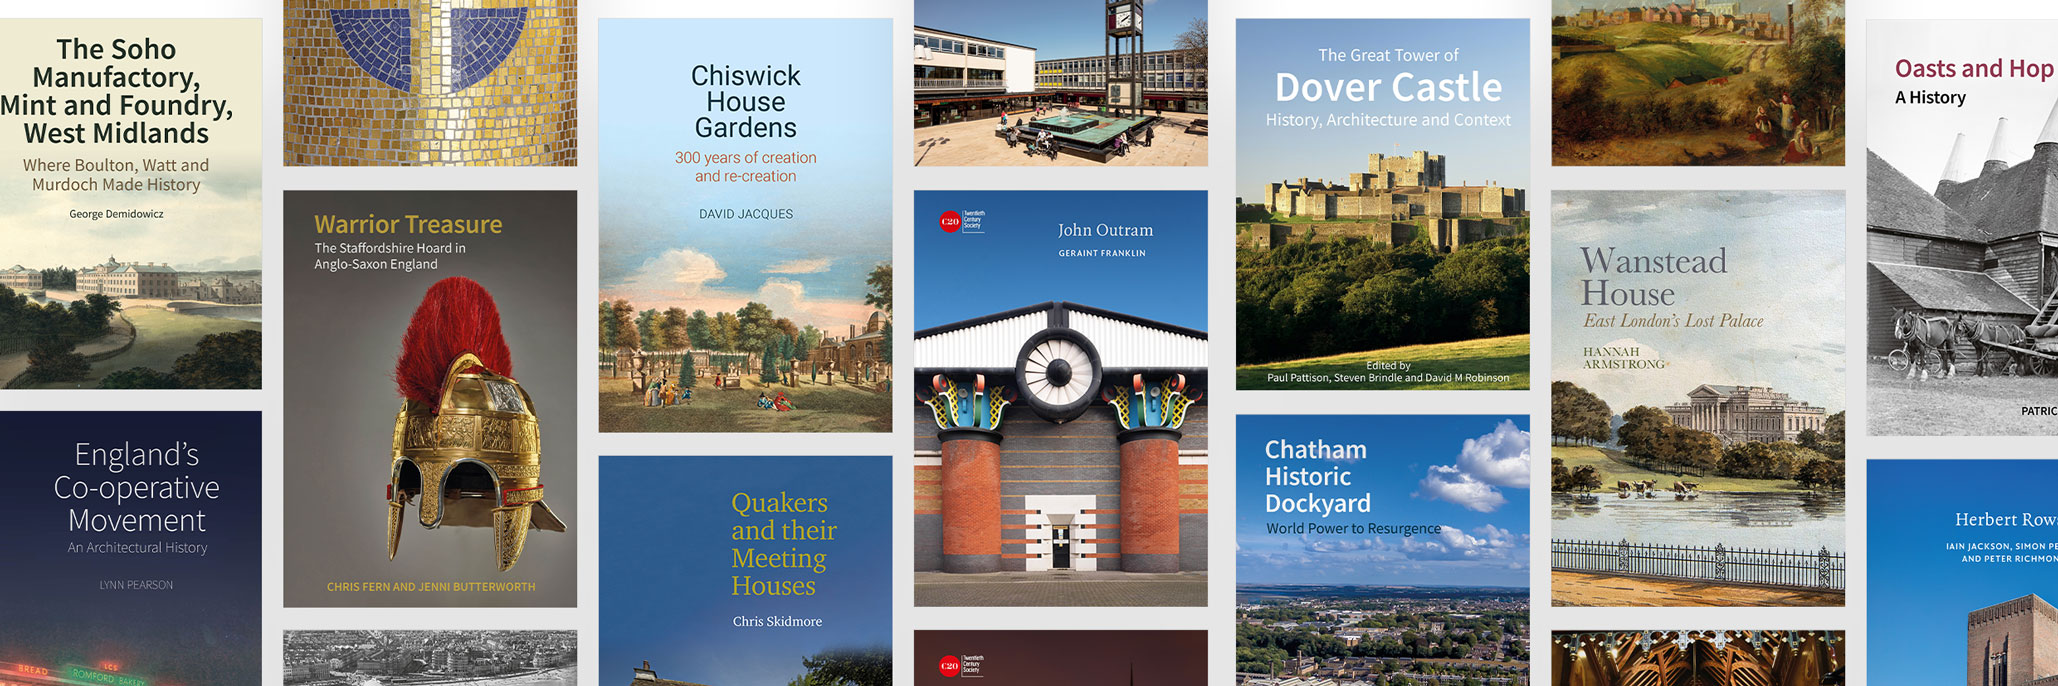 A composite image showing a range of book covers featuring different historic buildings or artefacts.